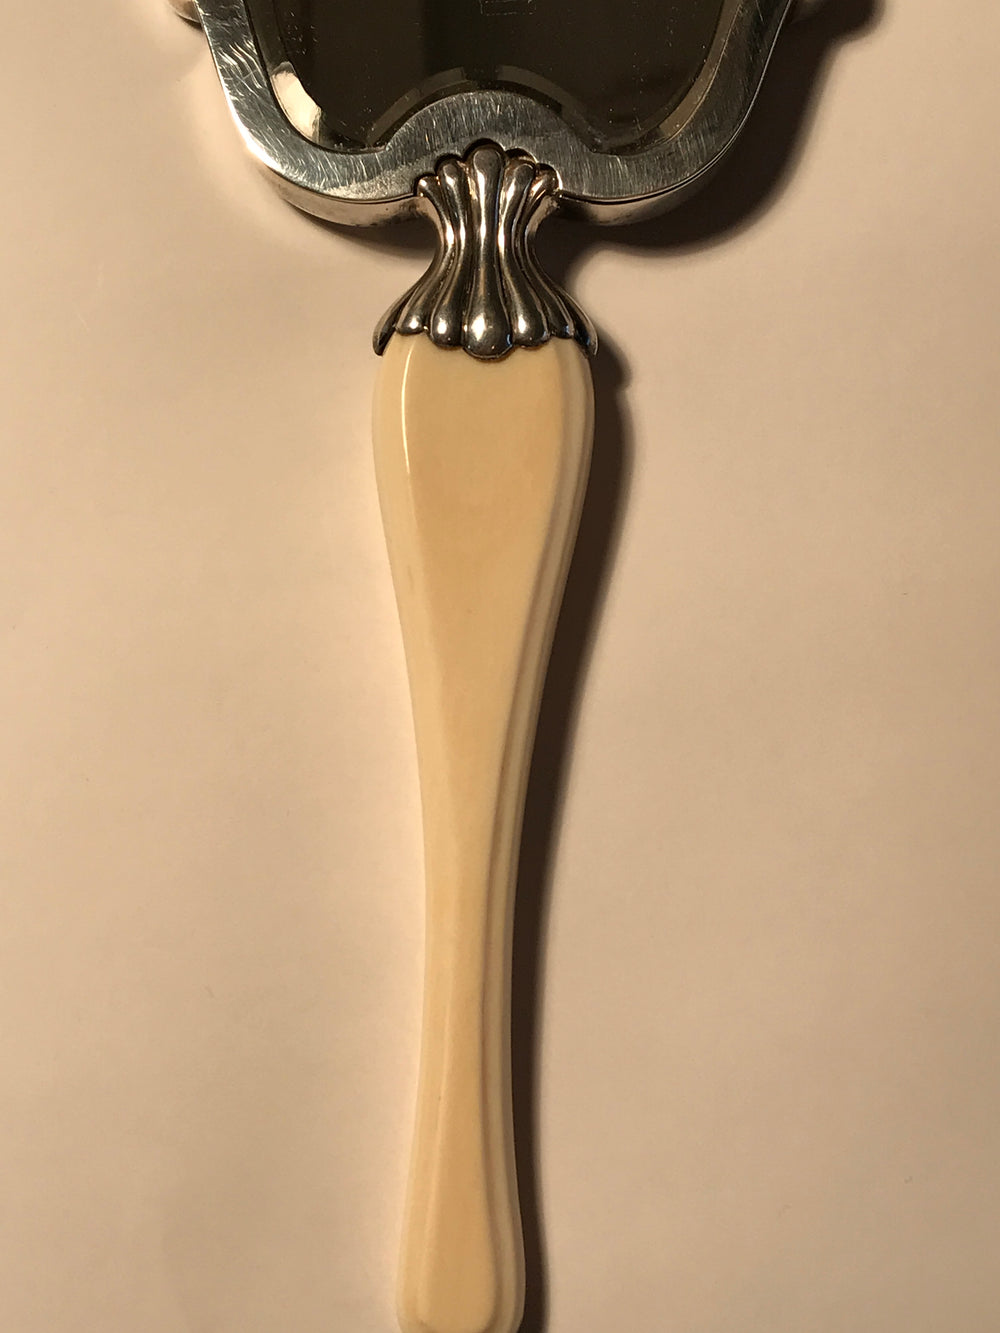 Very Elegant Italian silver and Ivory Hand Mirror, Fratelli Cacchione, Milan, Mid 20th century